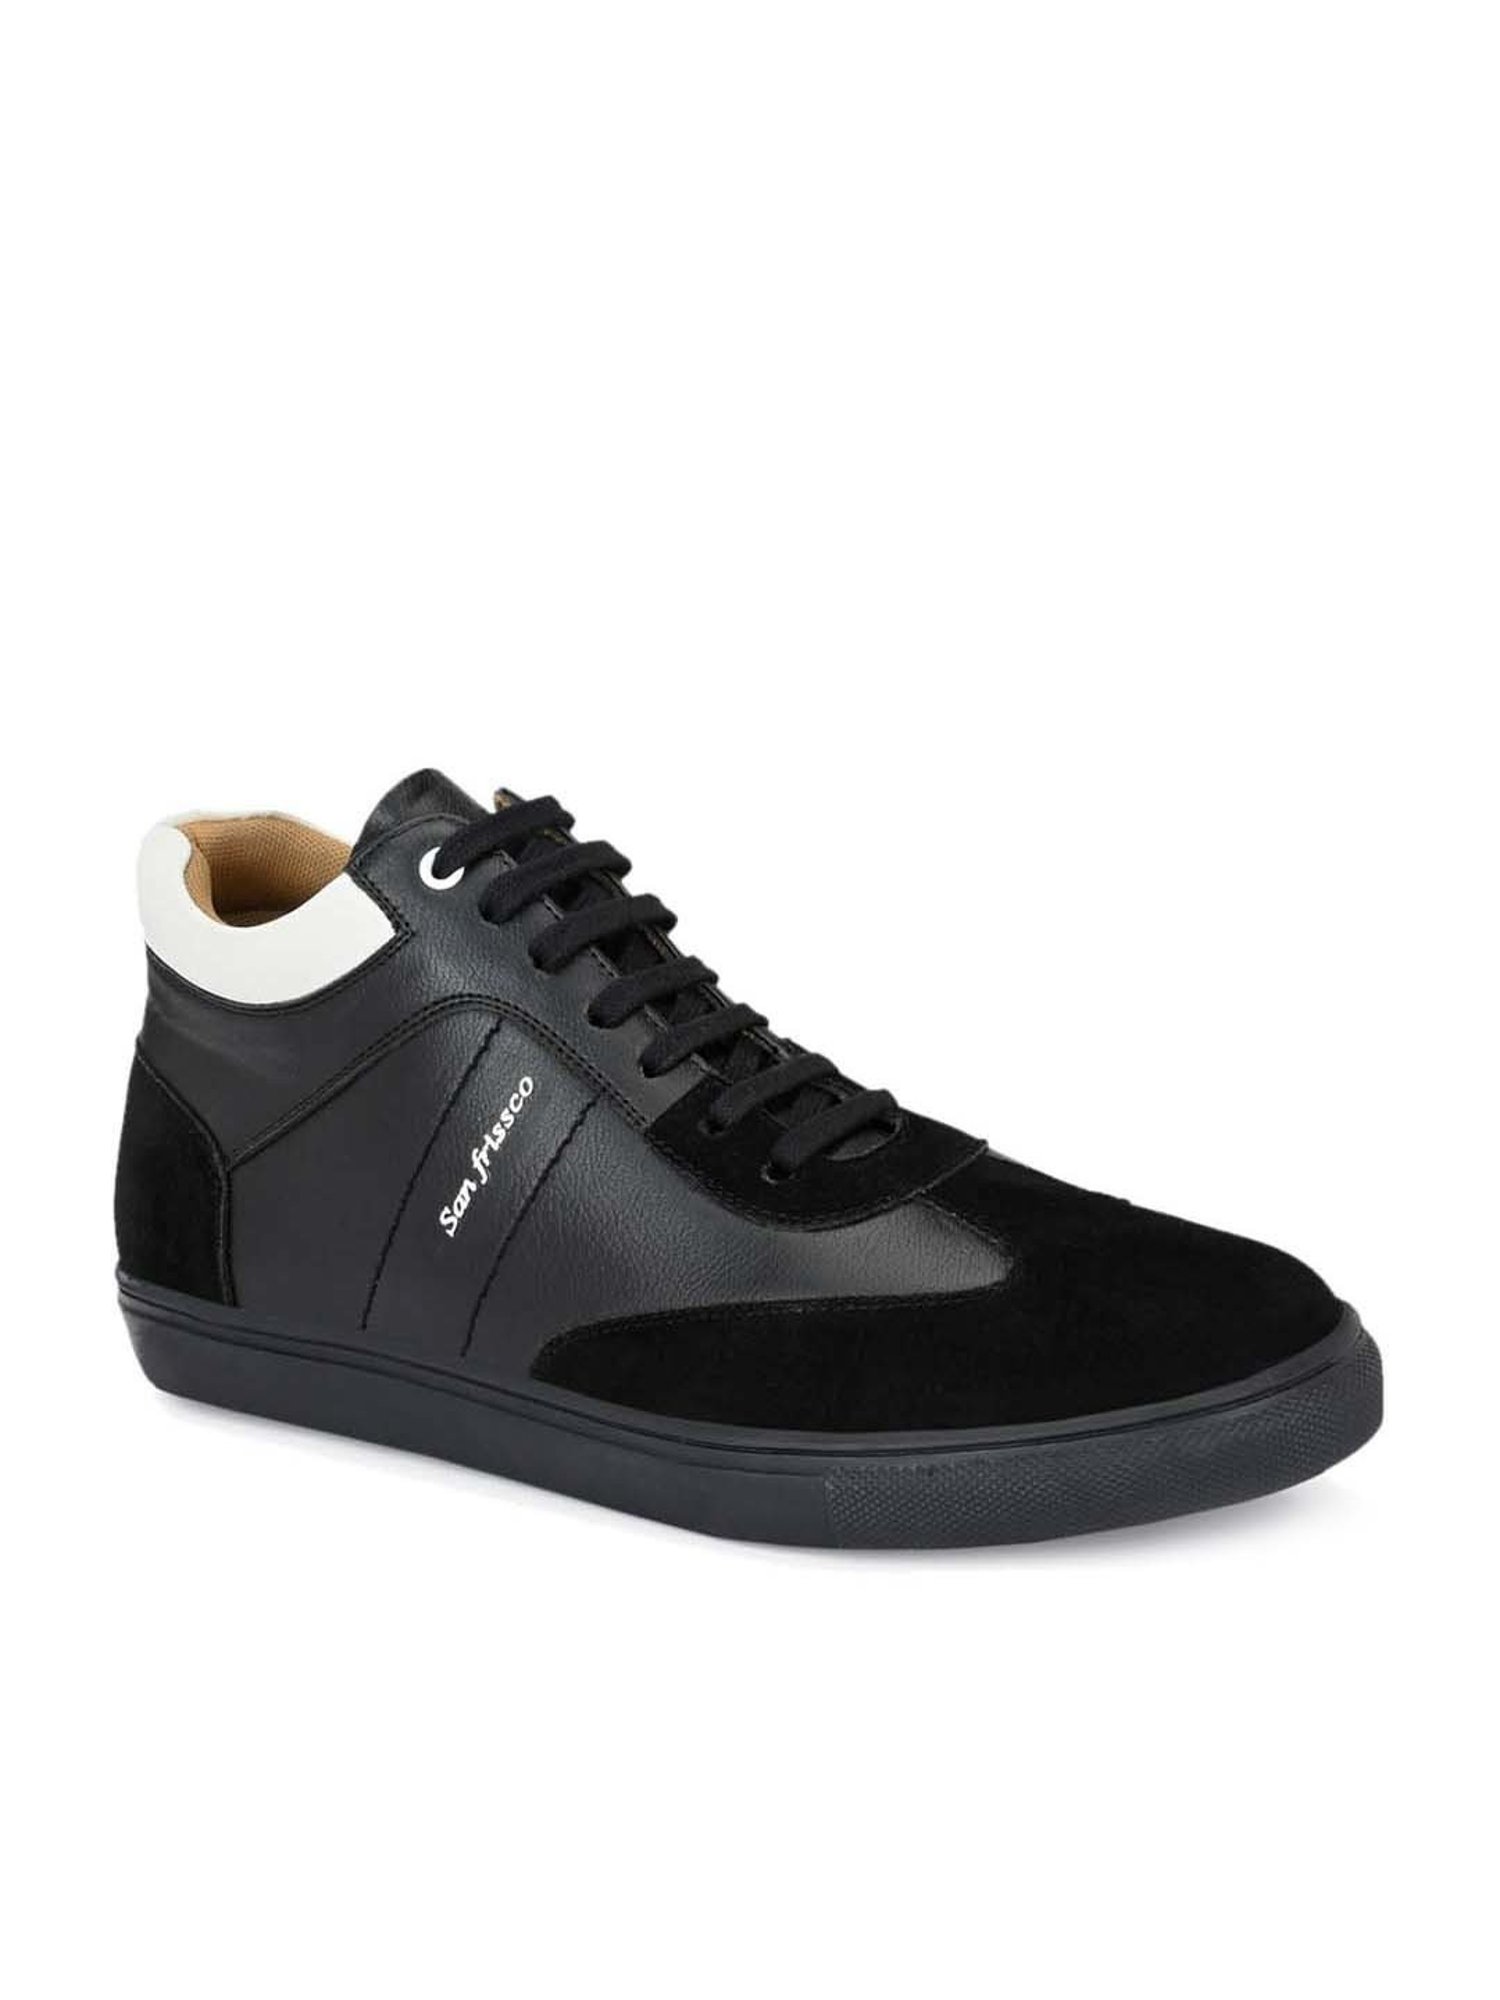 S0101 leather and canvas sneakers in black - Stone Island | Mytheresa